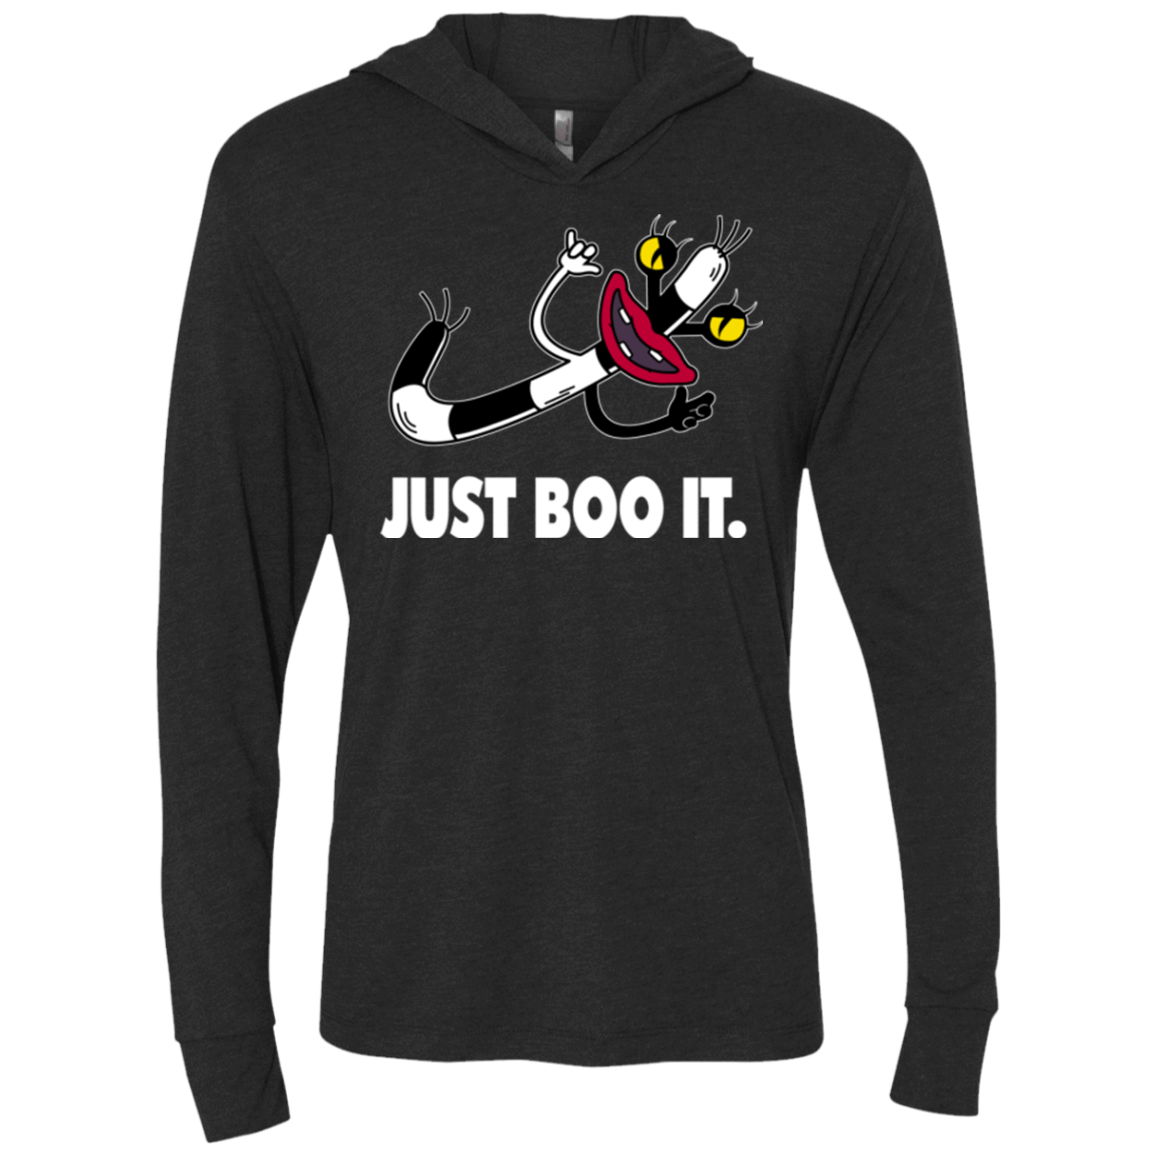 T-Shirts Vintage Black / X-Small Just Boo It Triblend Long Sleeve Hoodie Tee